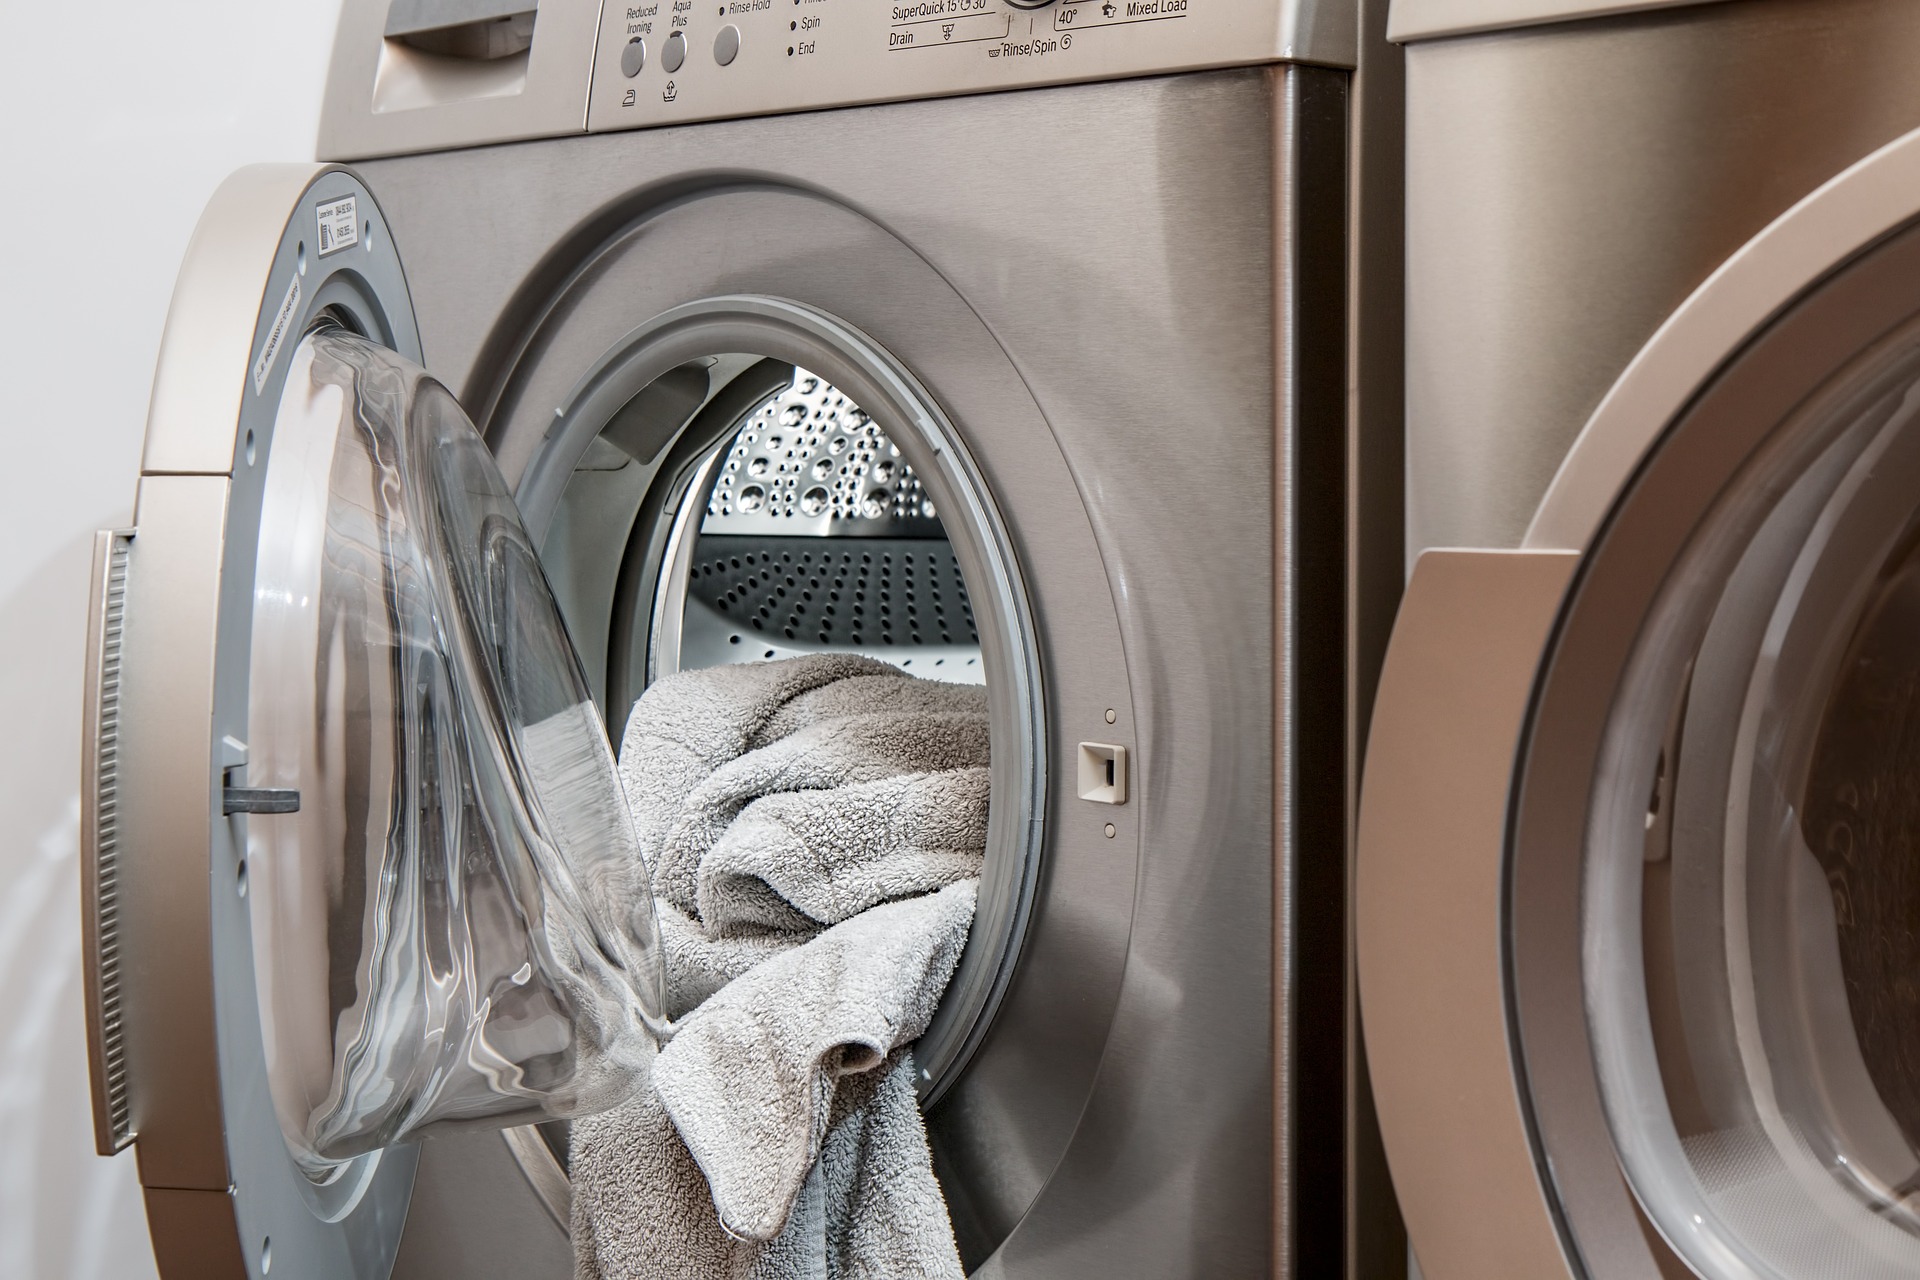 How Much Does A Load Of Laundry Cost At Home: Home vs Laundromat Costs